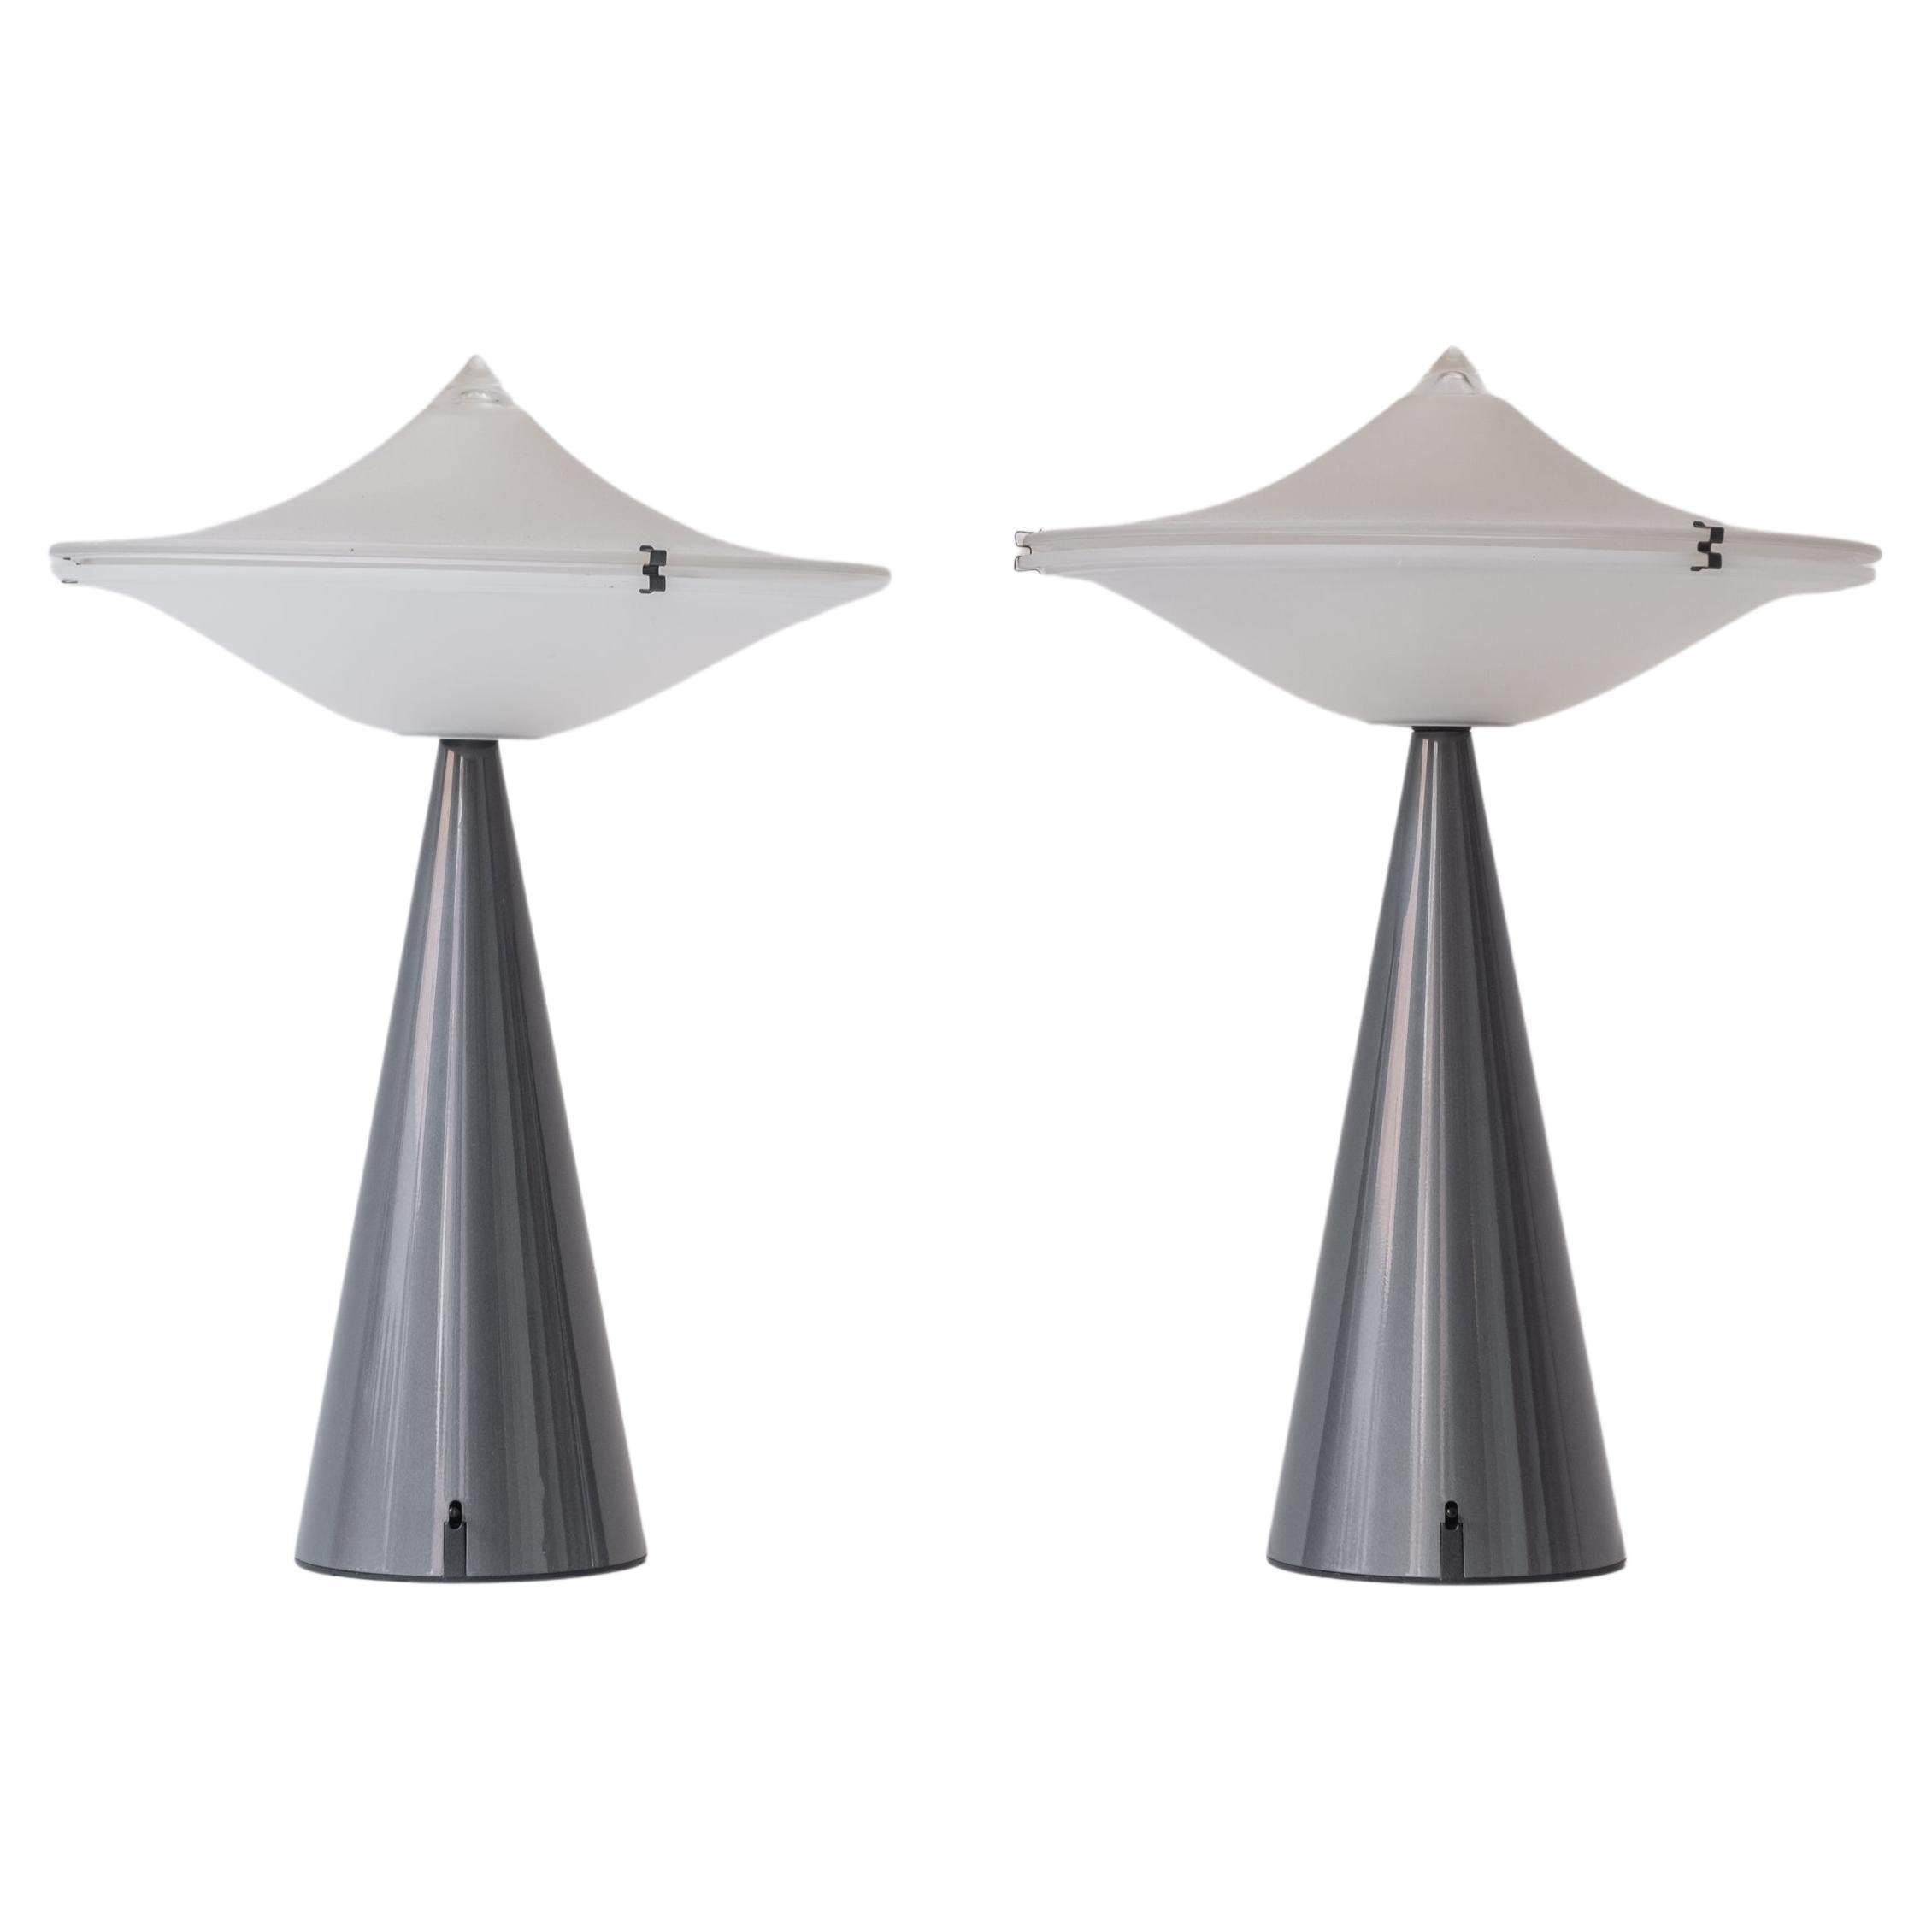 Set of Two Table Lamps by Luciano Cesaro for Tre Ci Luce, Italy 1980s